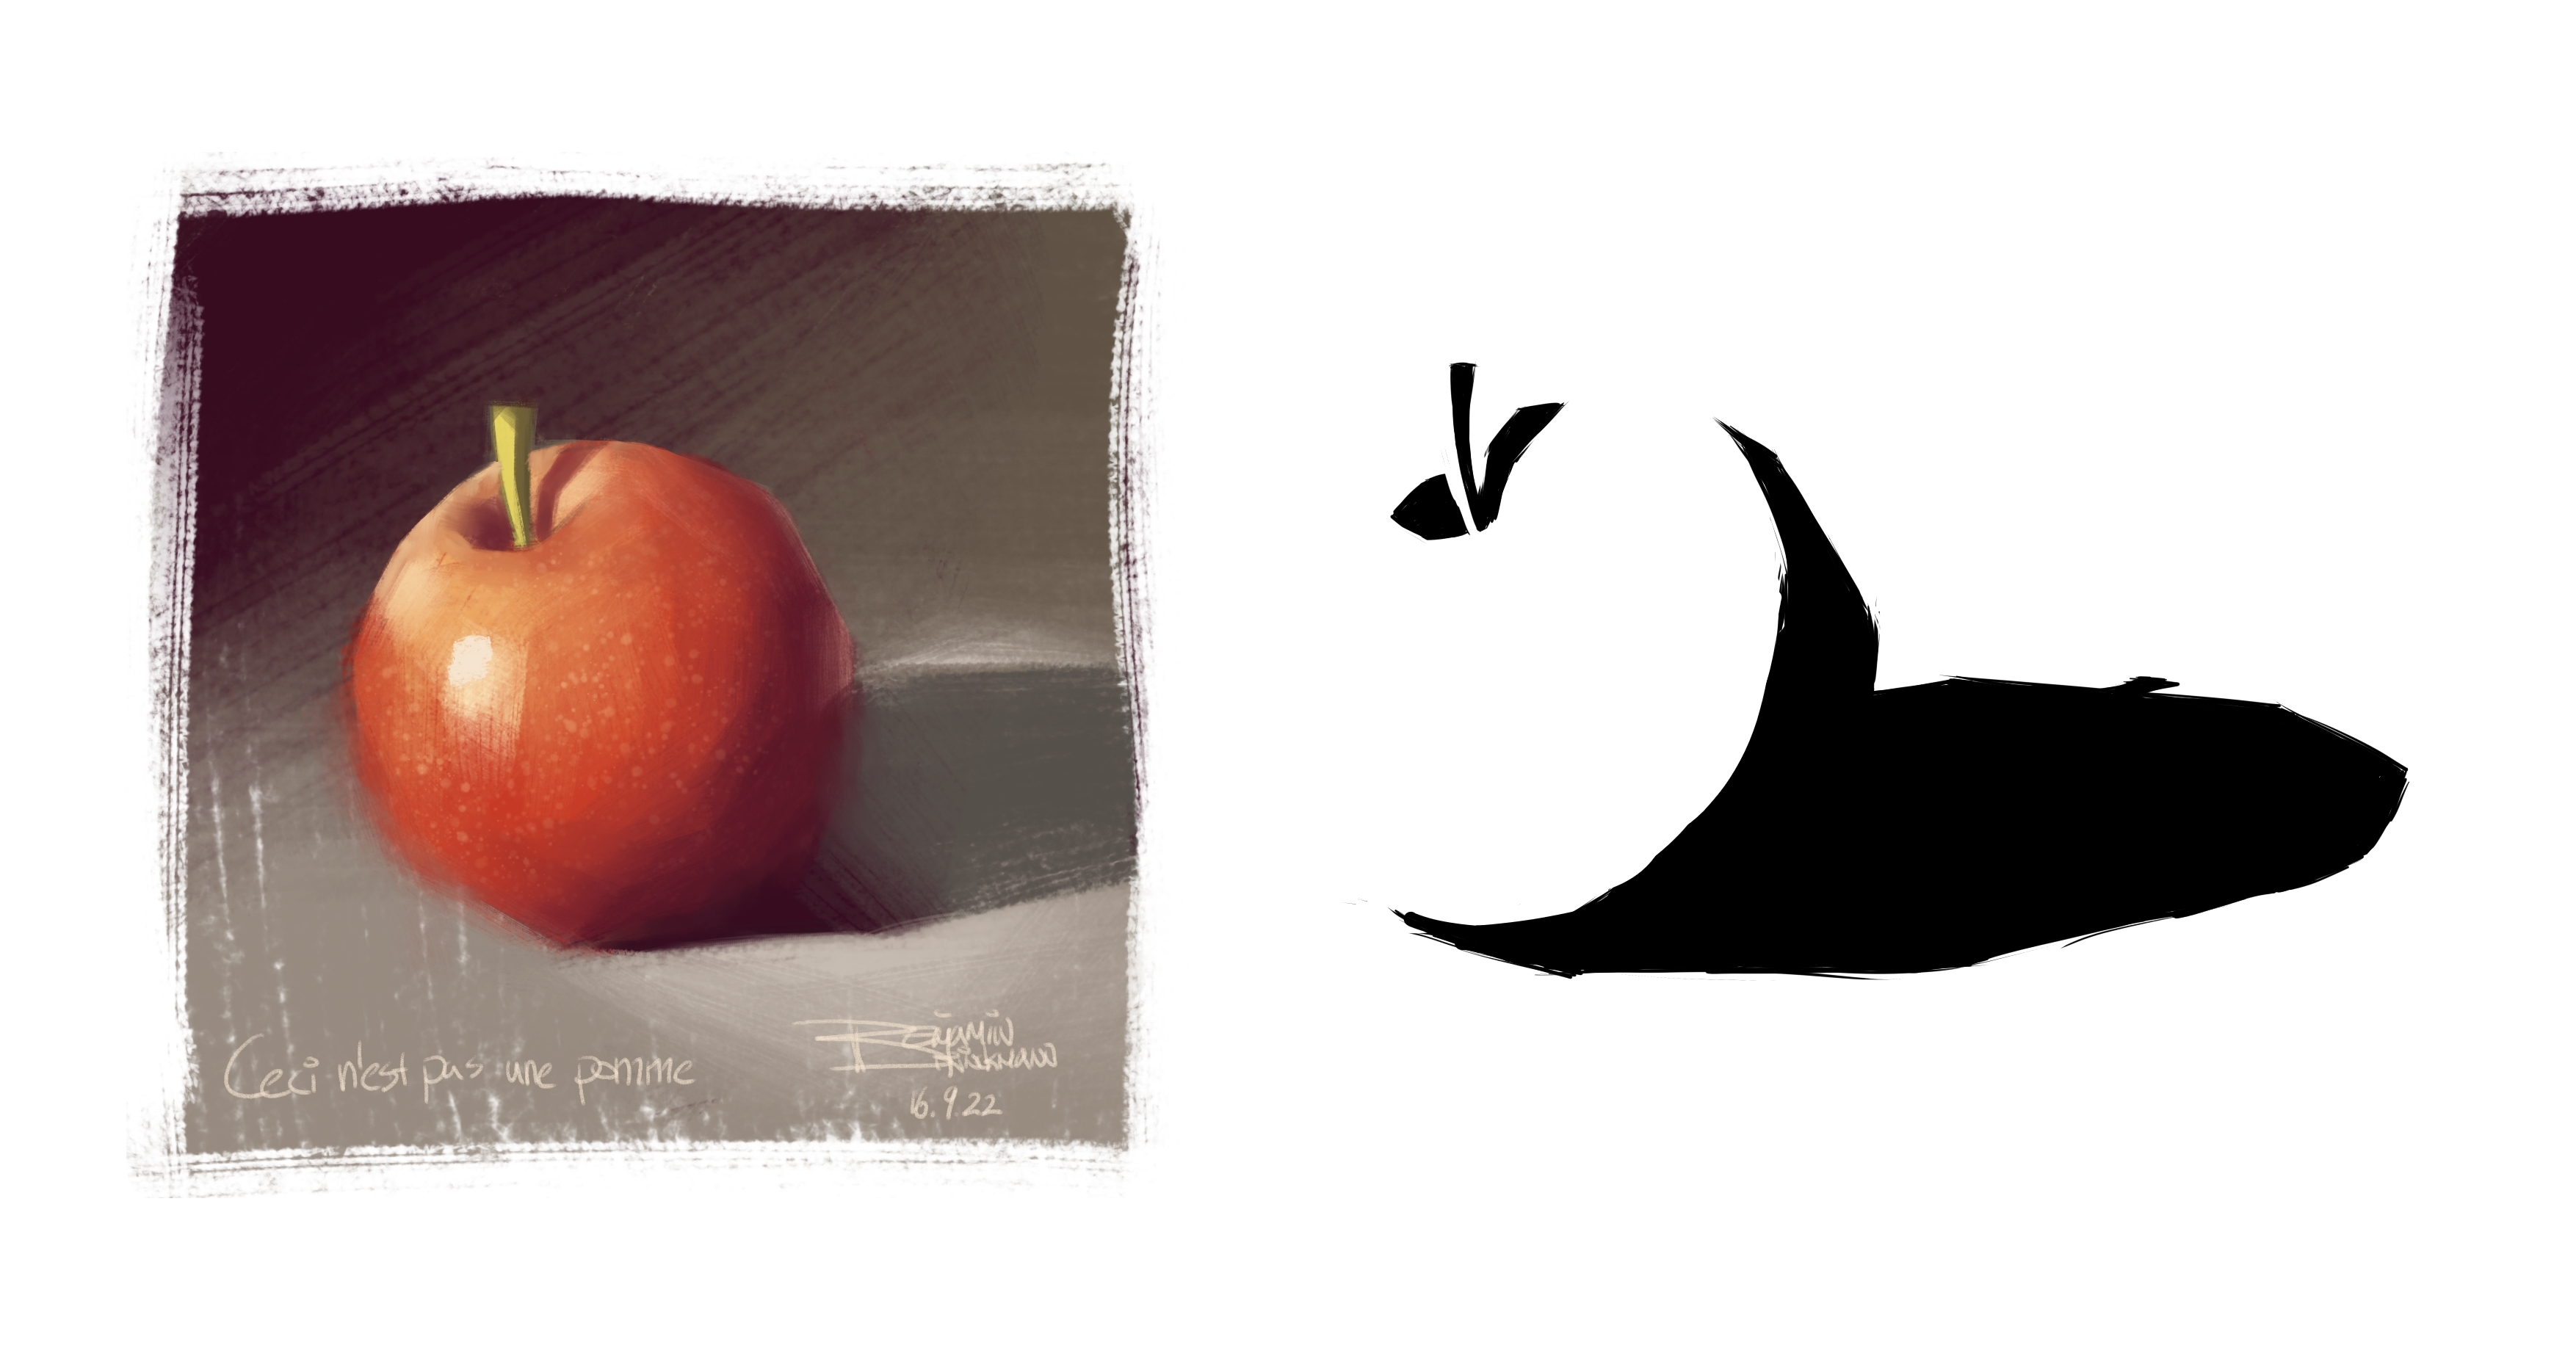 same apple study, but with a Notan drawing to the right. The shadows drawn in hard black with no transitions